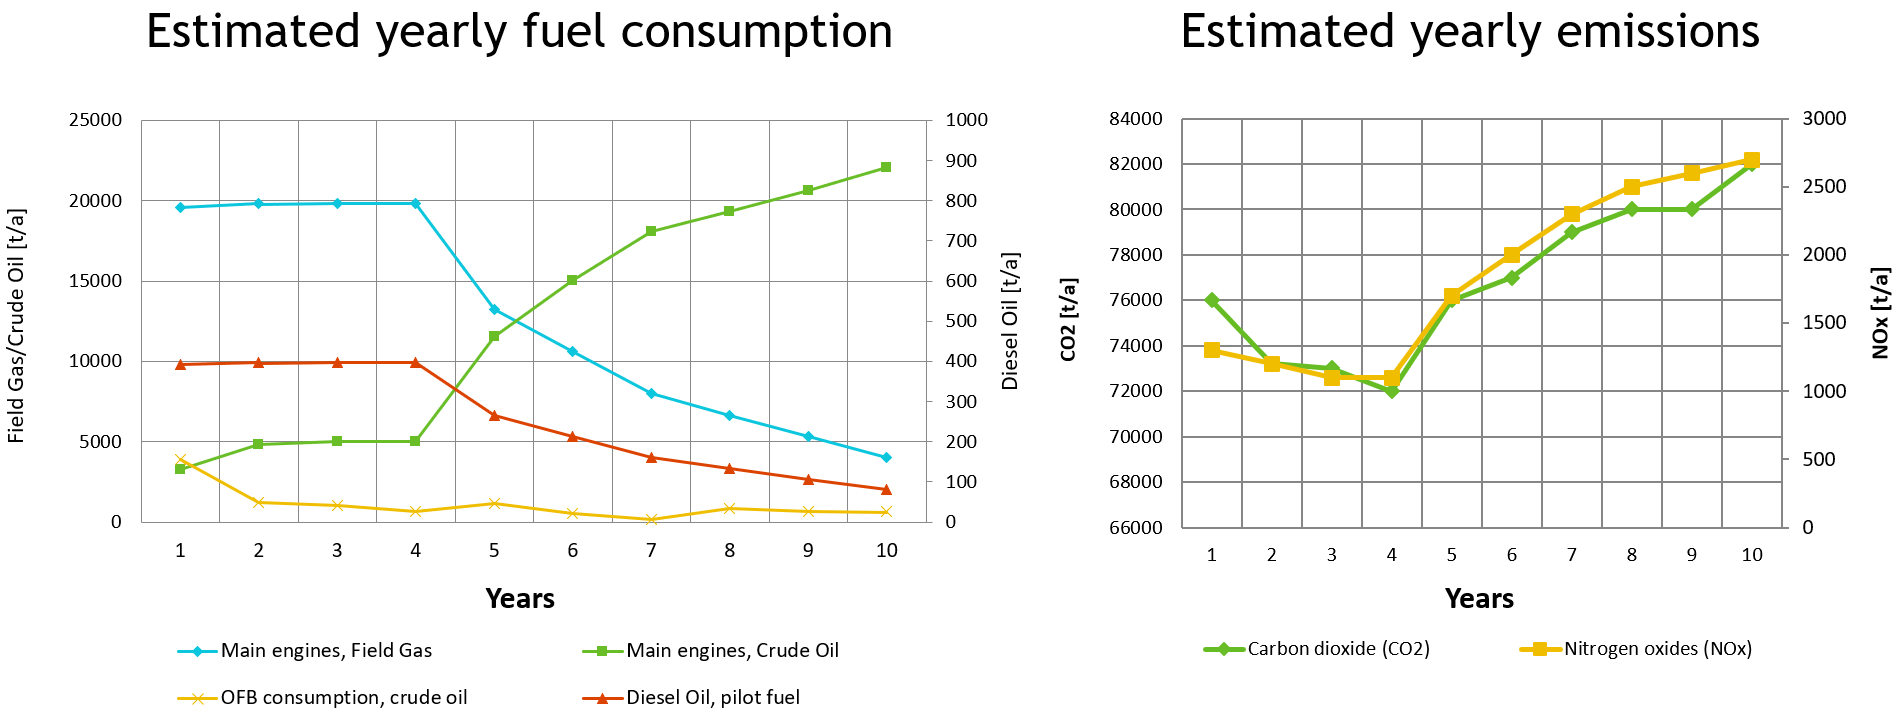 Estimated yearly fuel consumption and emissions